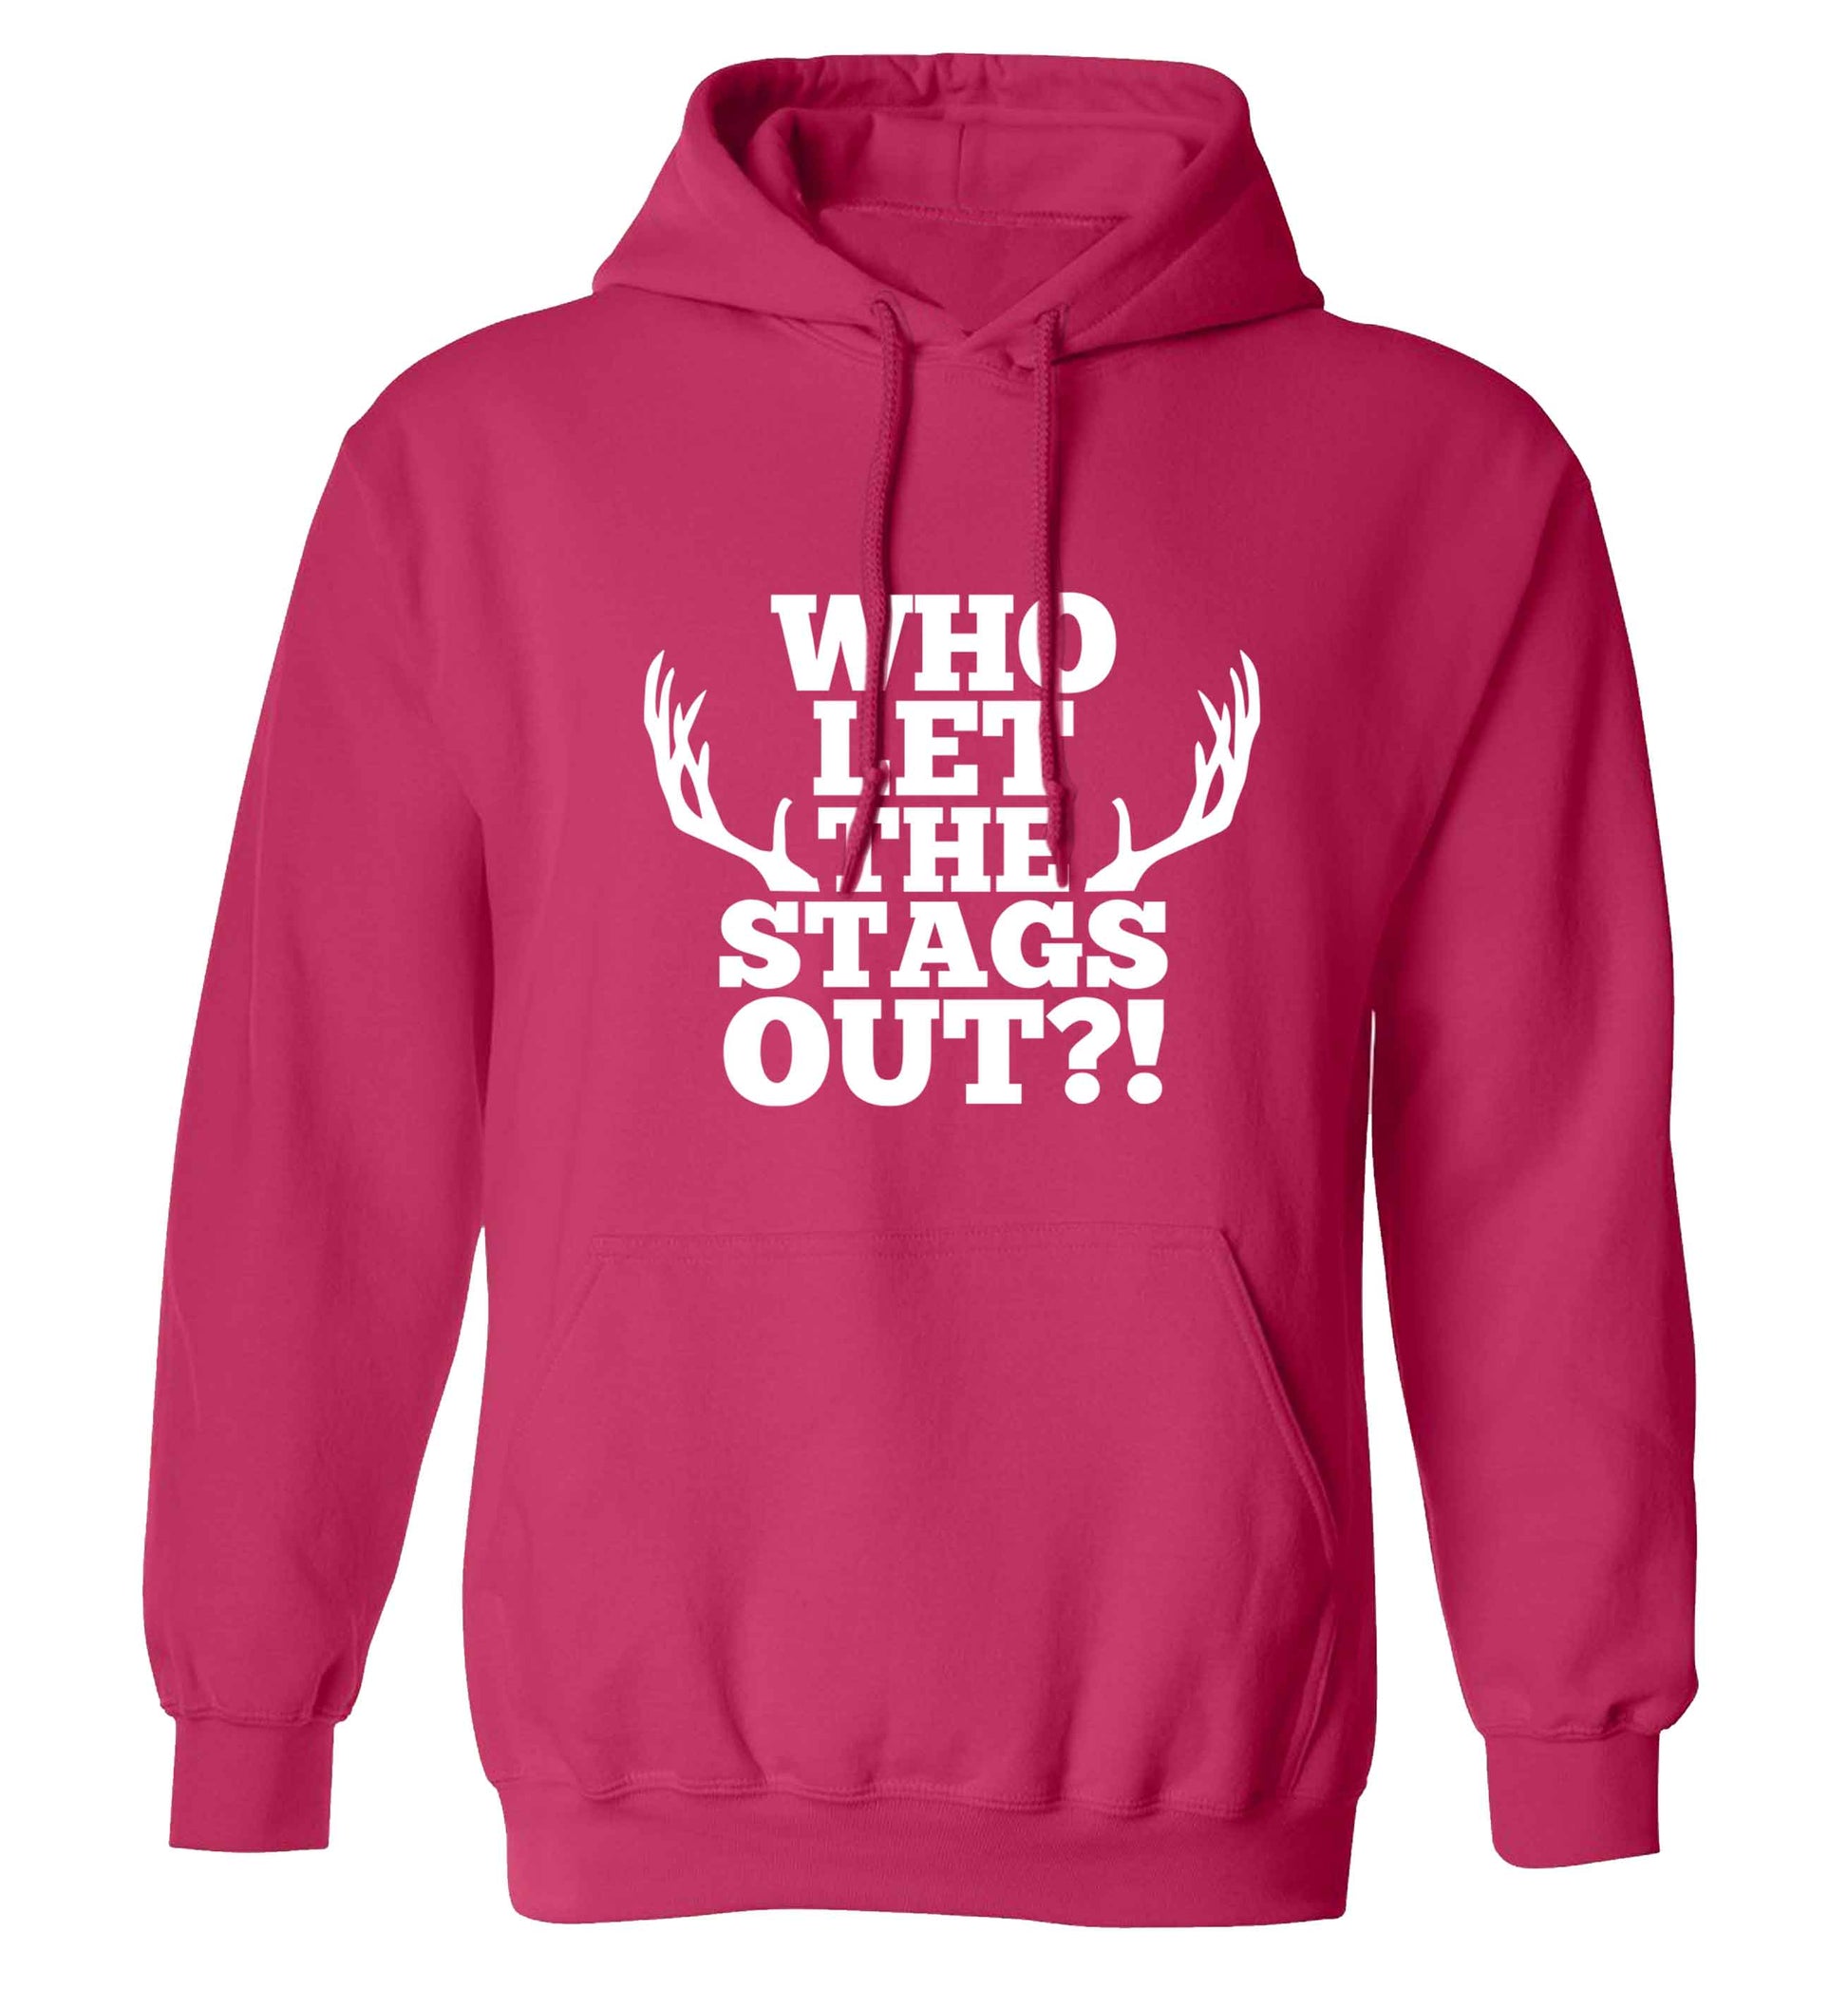 Who let the stags out adults unisex pink hoodie 2XL